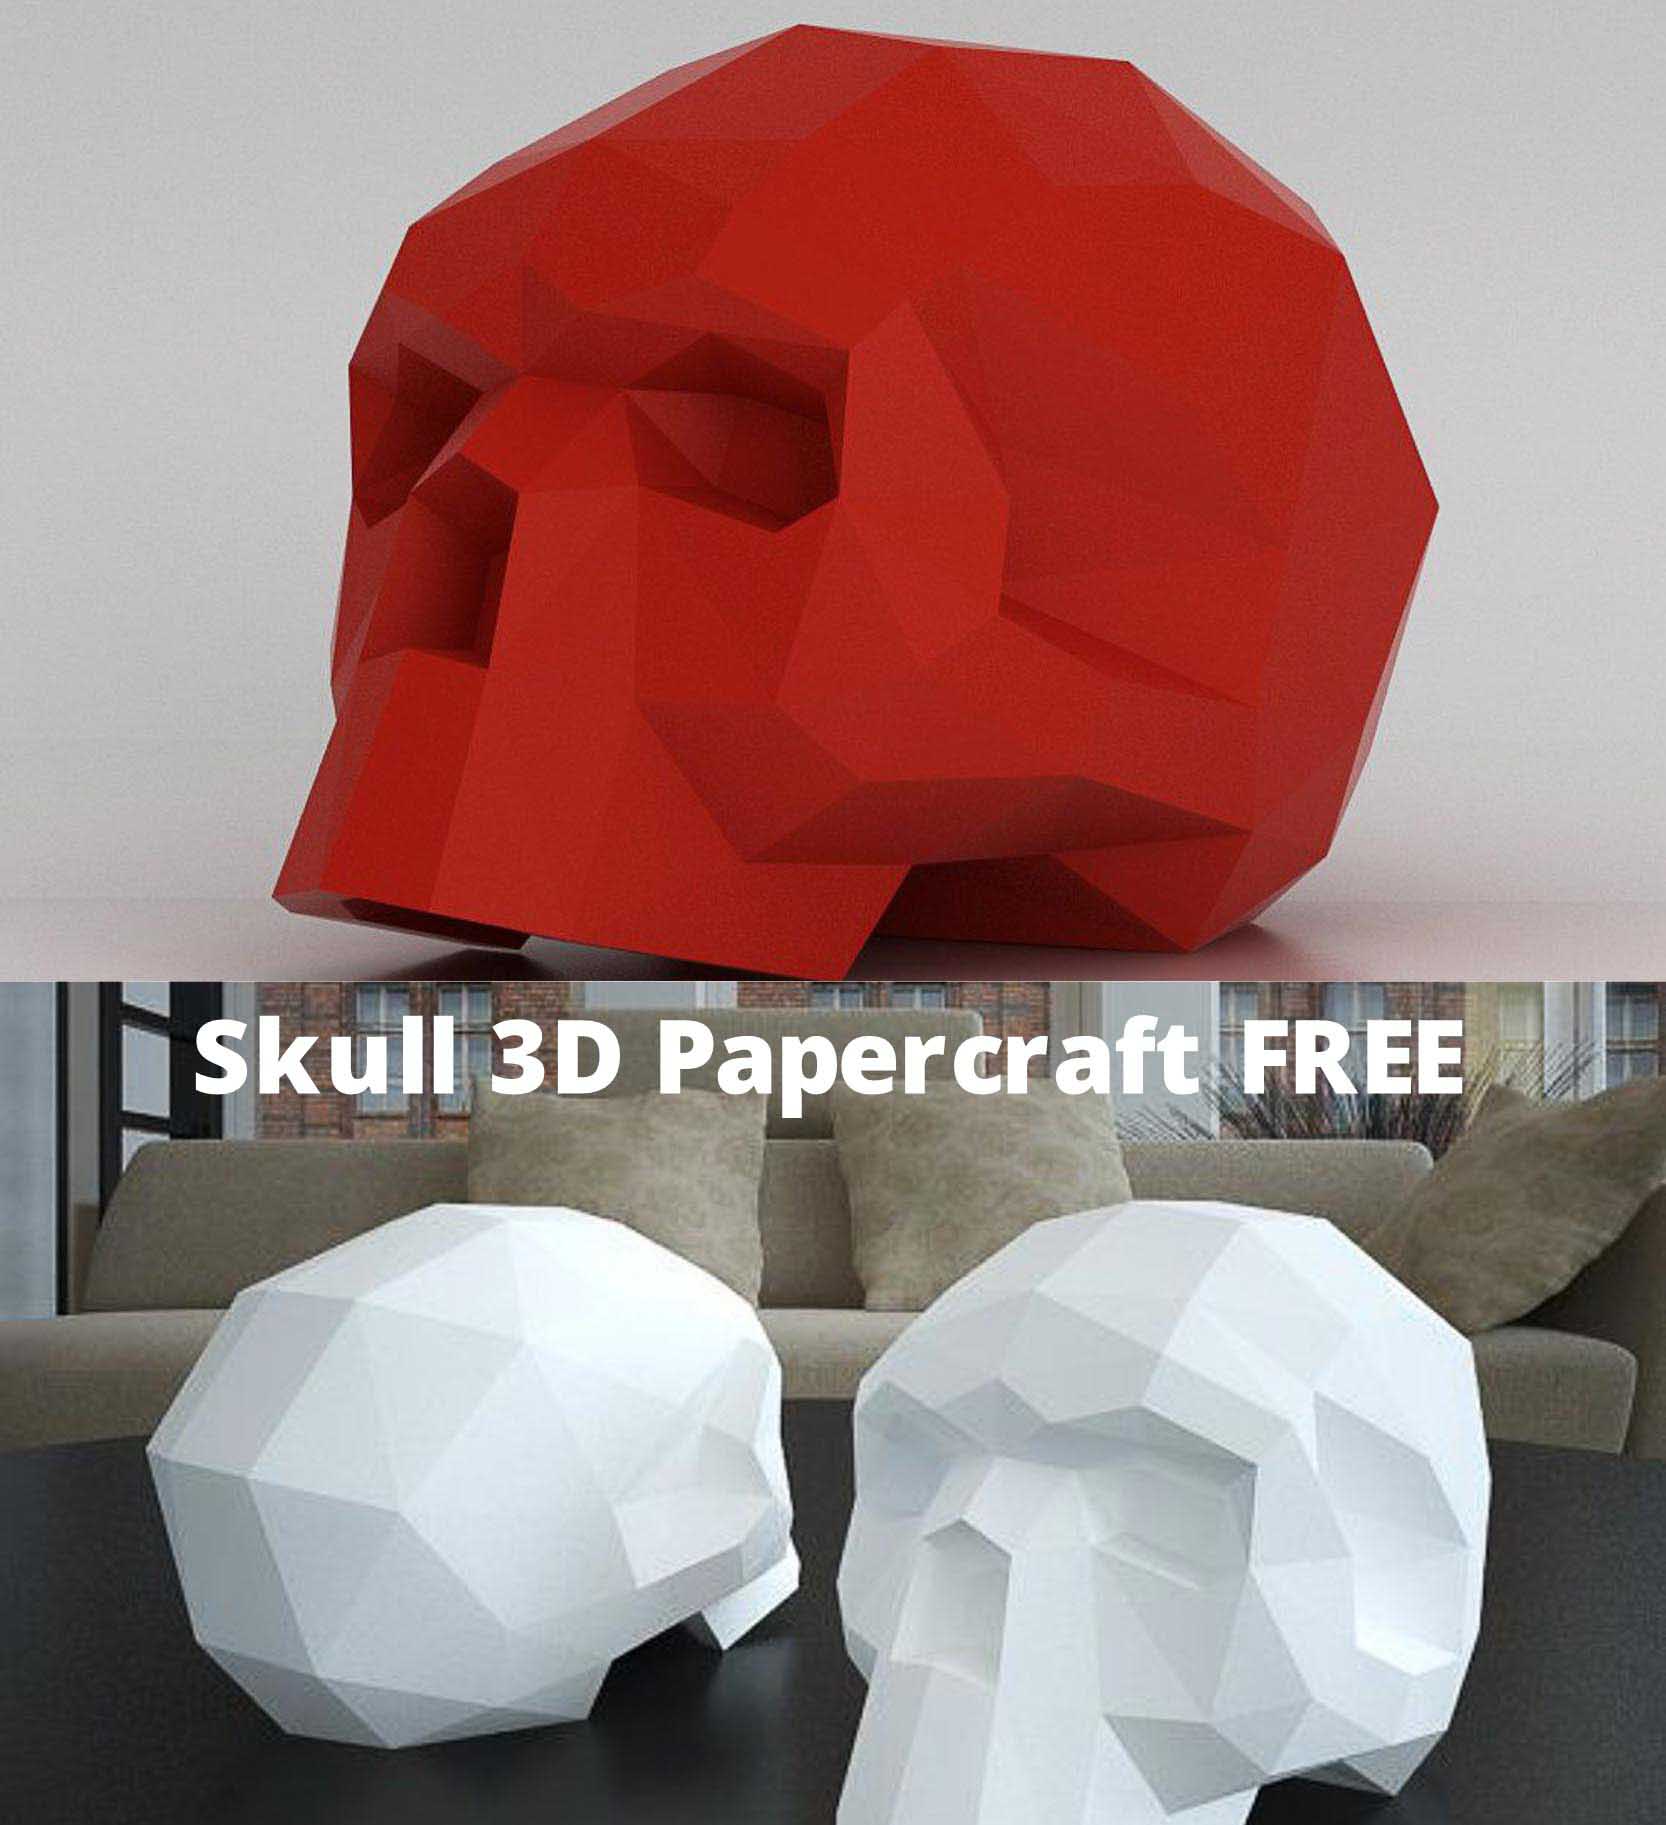 Introducing 3d paper model of human skull. You can easily create paper